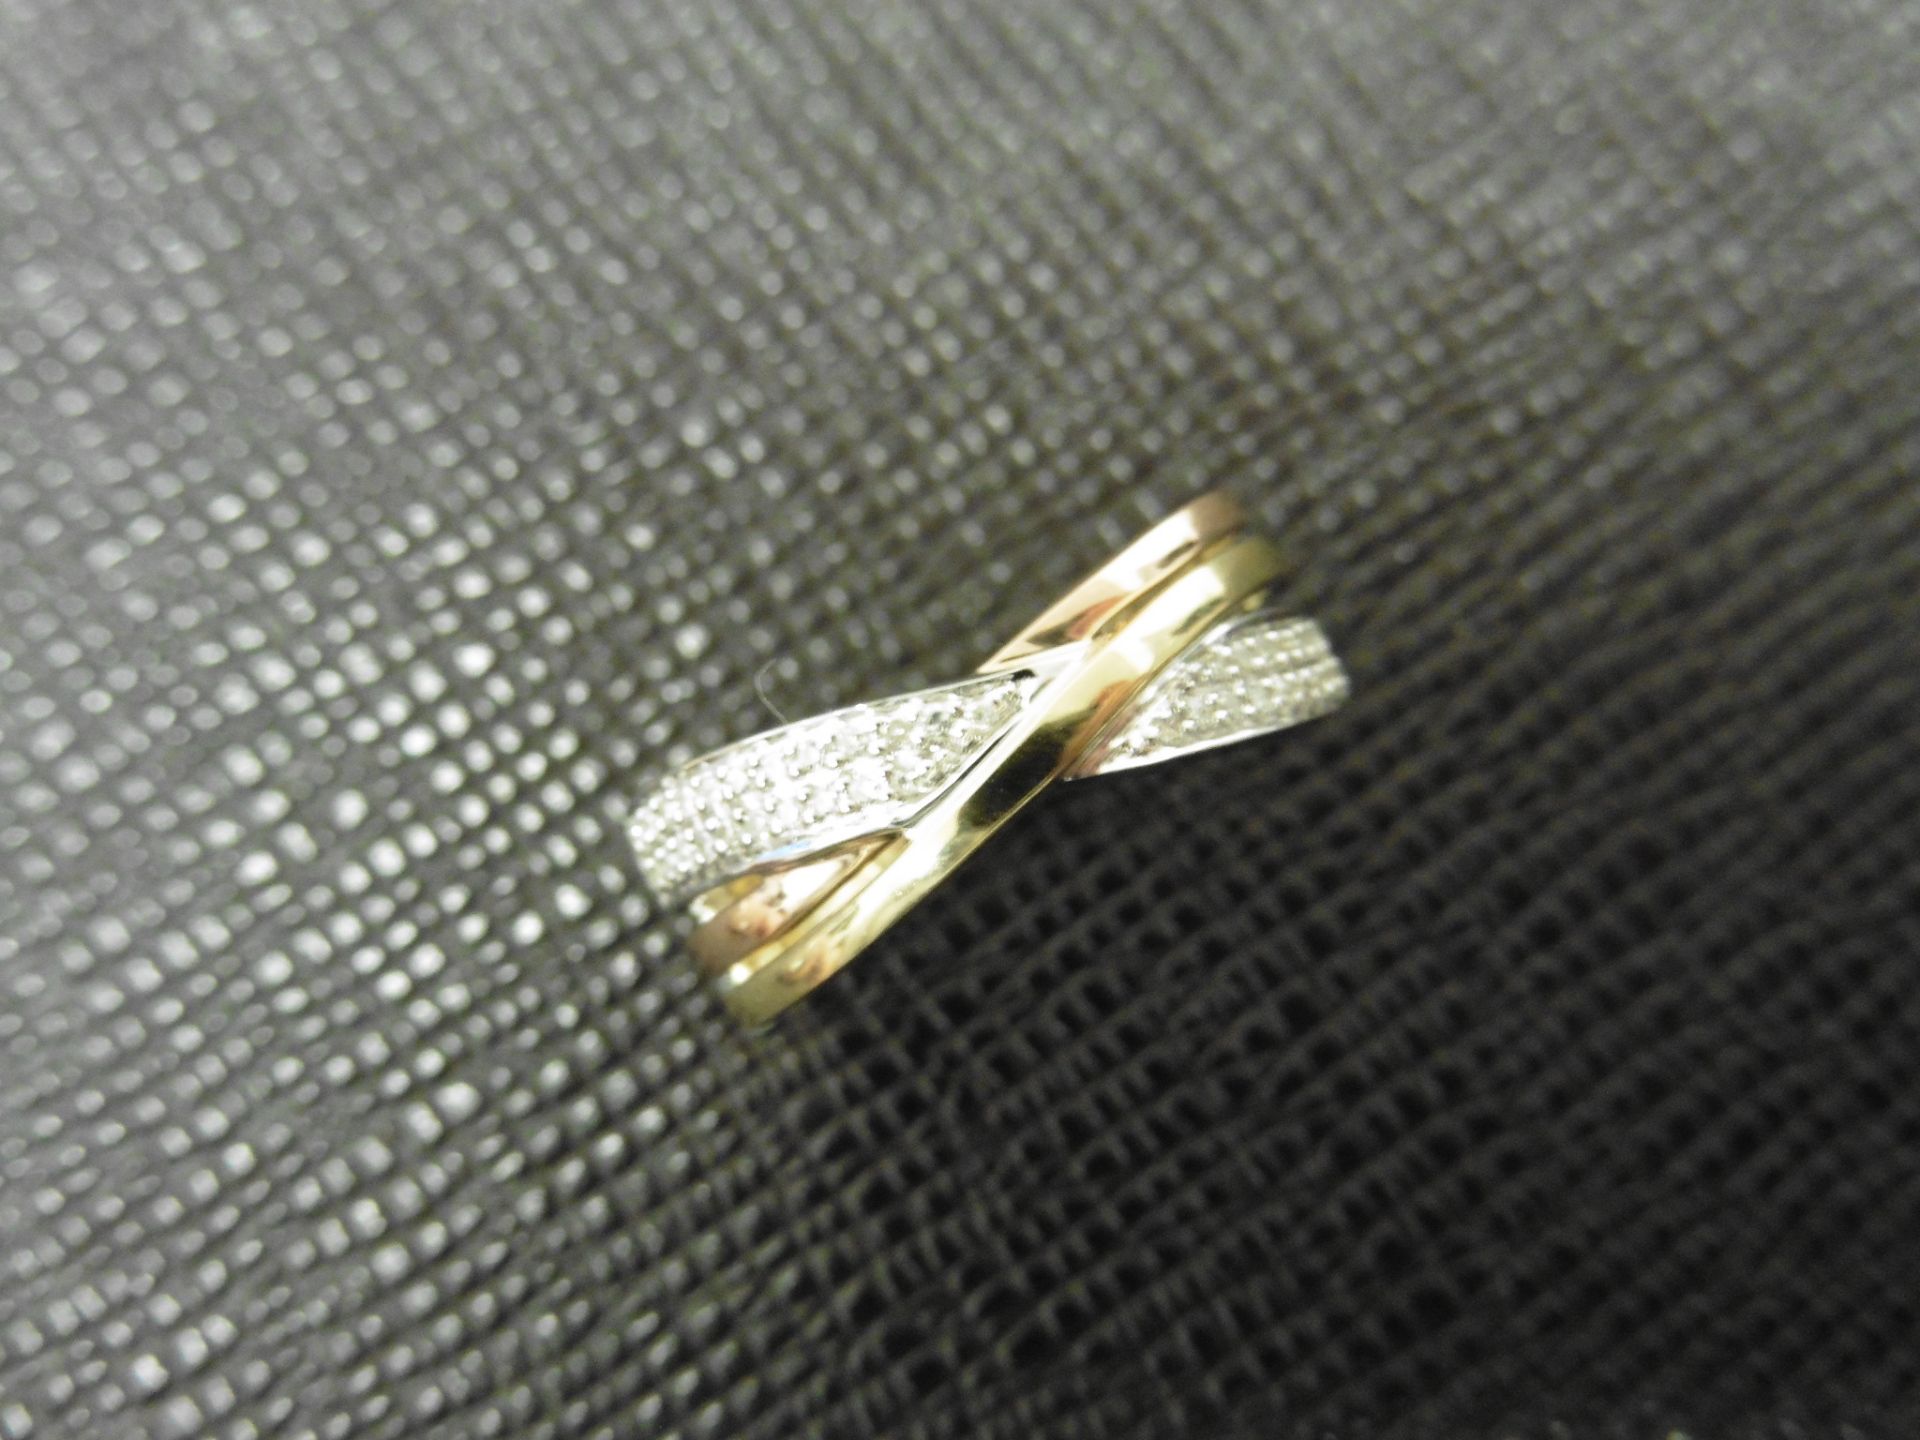 0.14ct diamond crossover band ring set in 9ct gold.